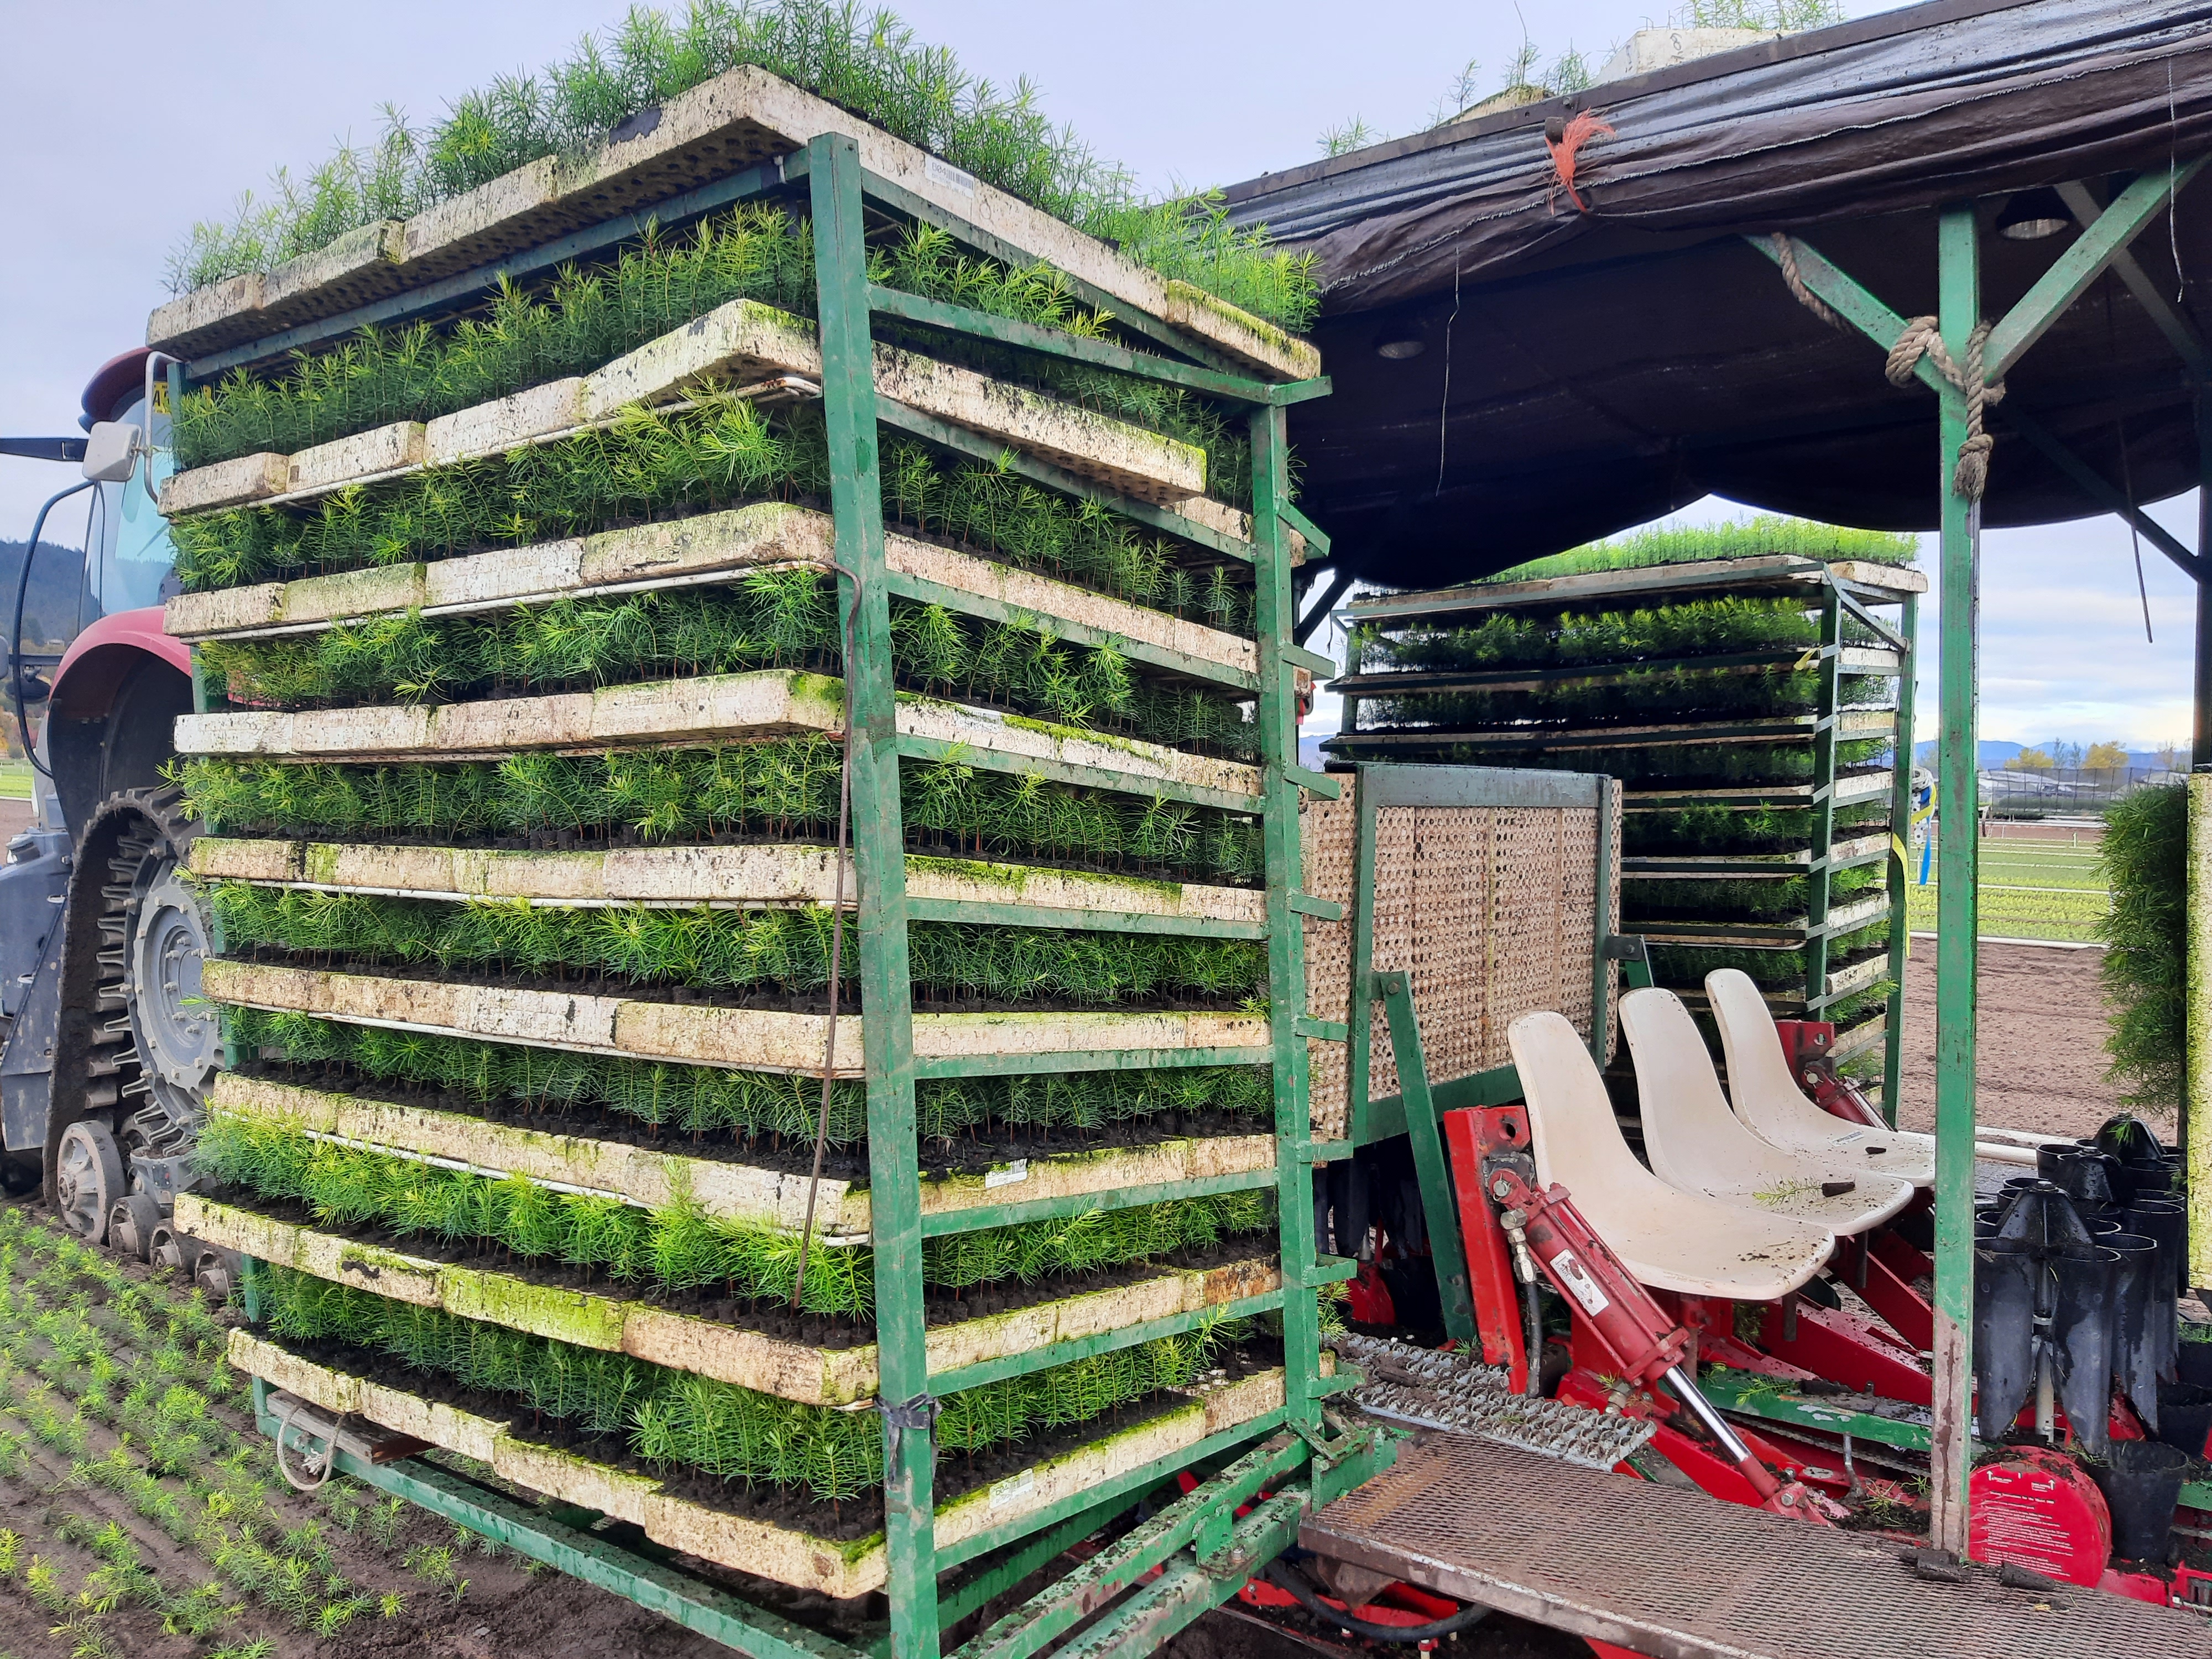 A picture showing a large stack of small seedlings on a transport tray connected to a piece of farm equipment used for moving the seedlings around.